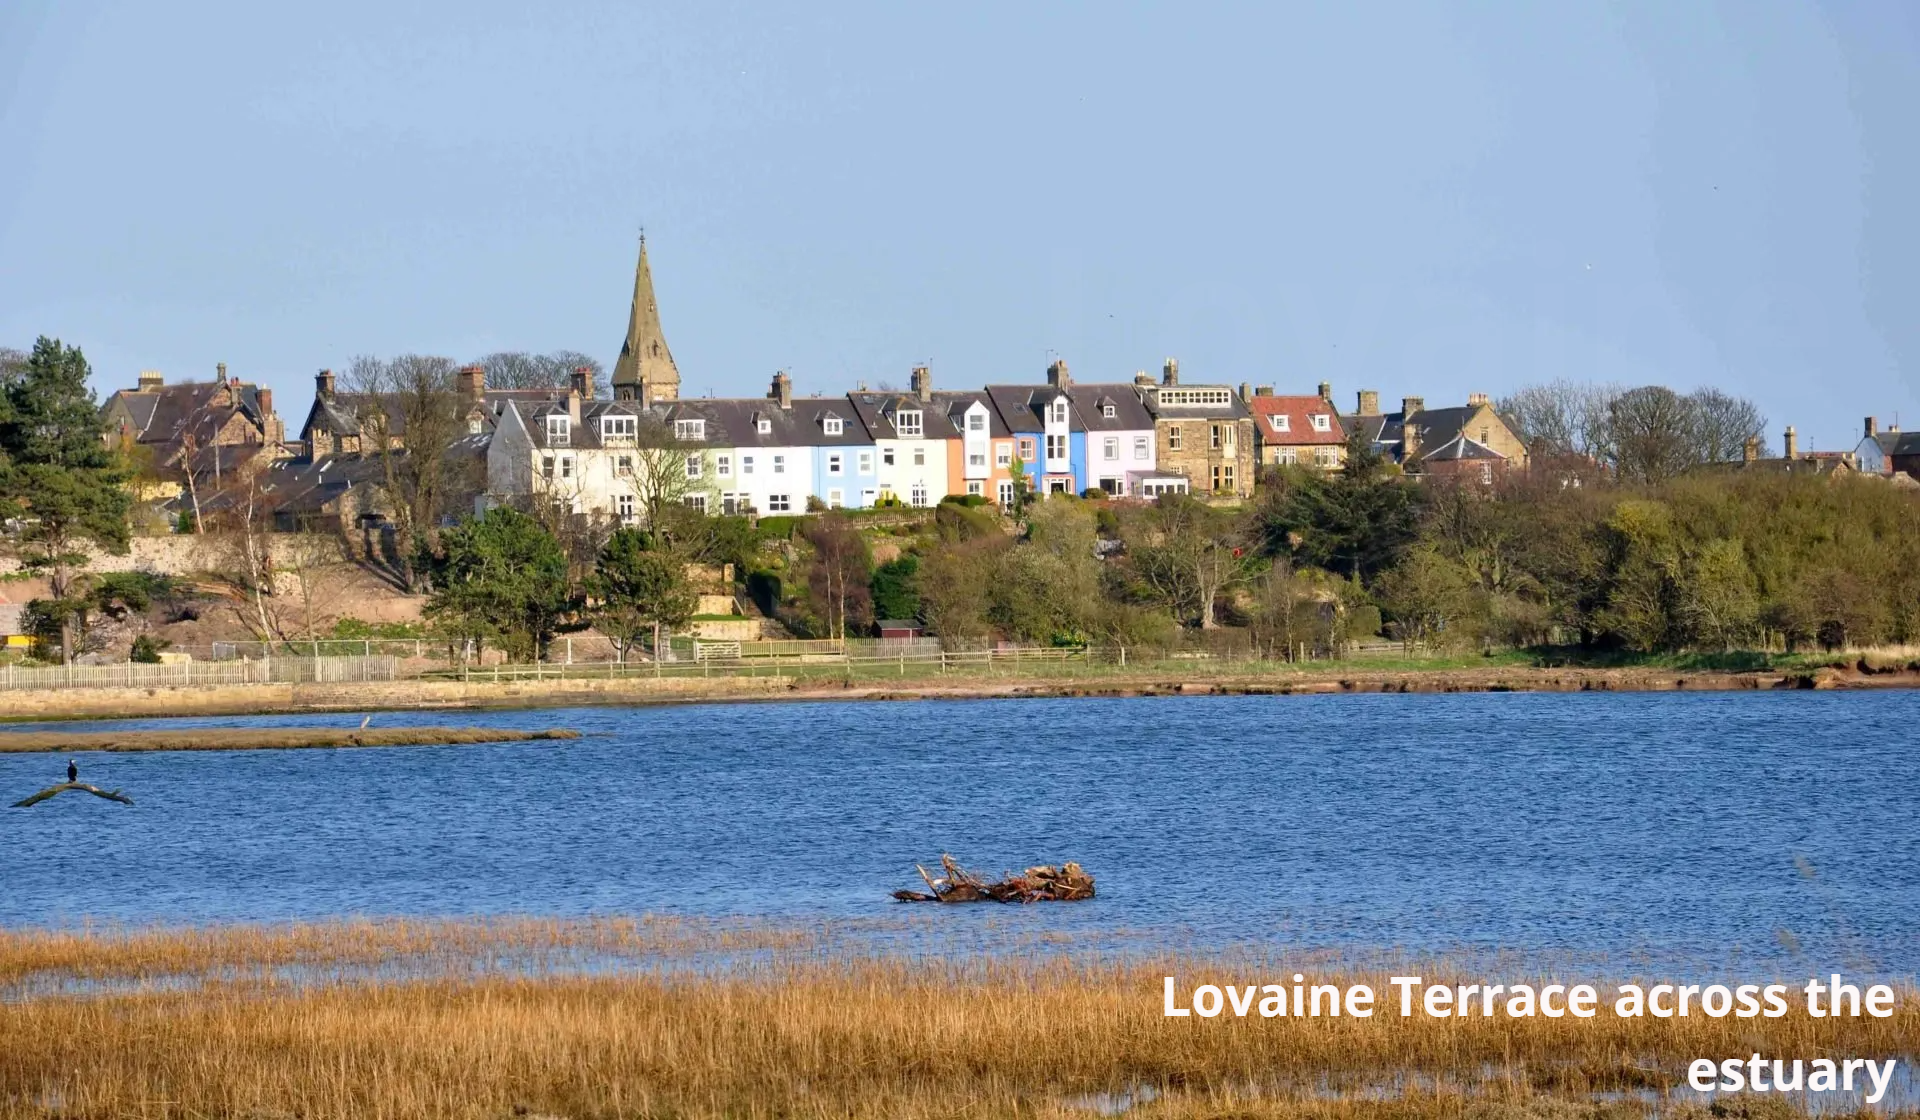 The iconic Lovaine Terrace in Alnmouth village